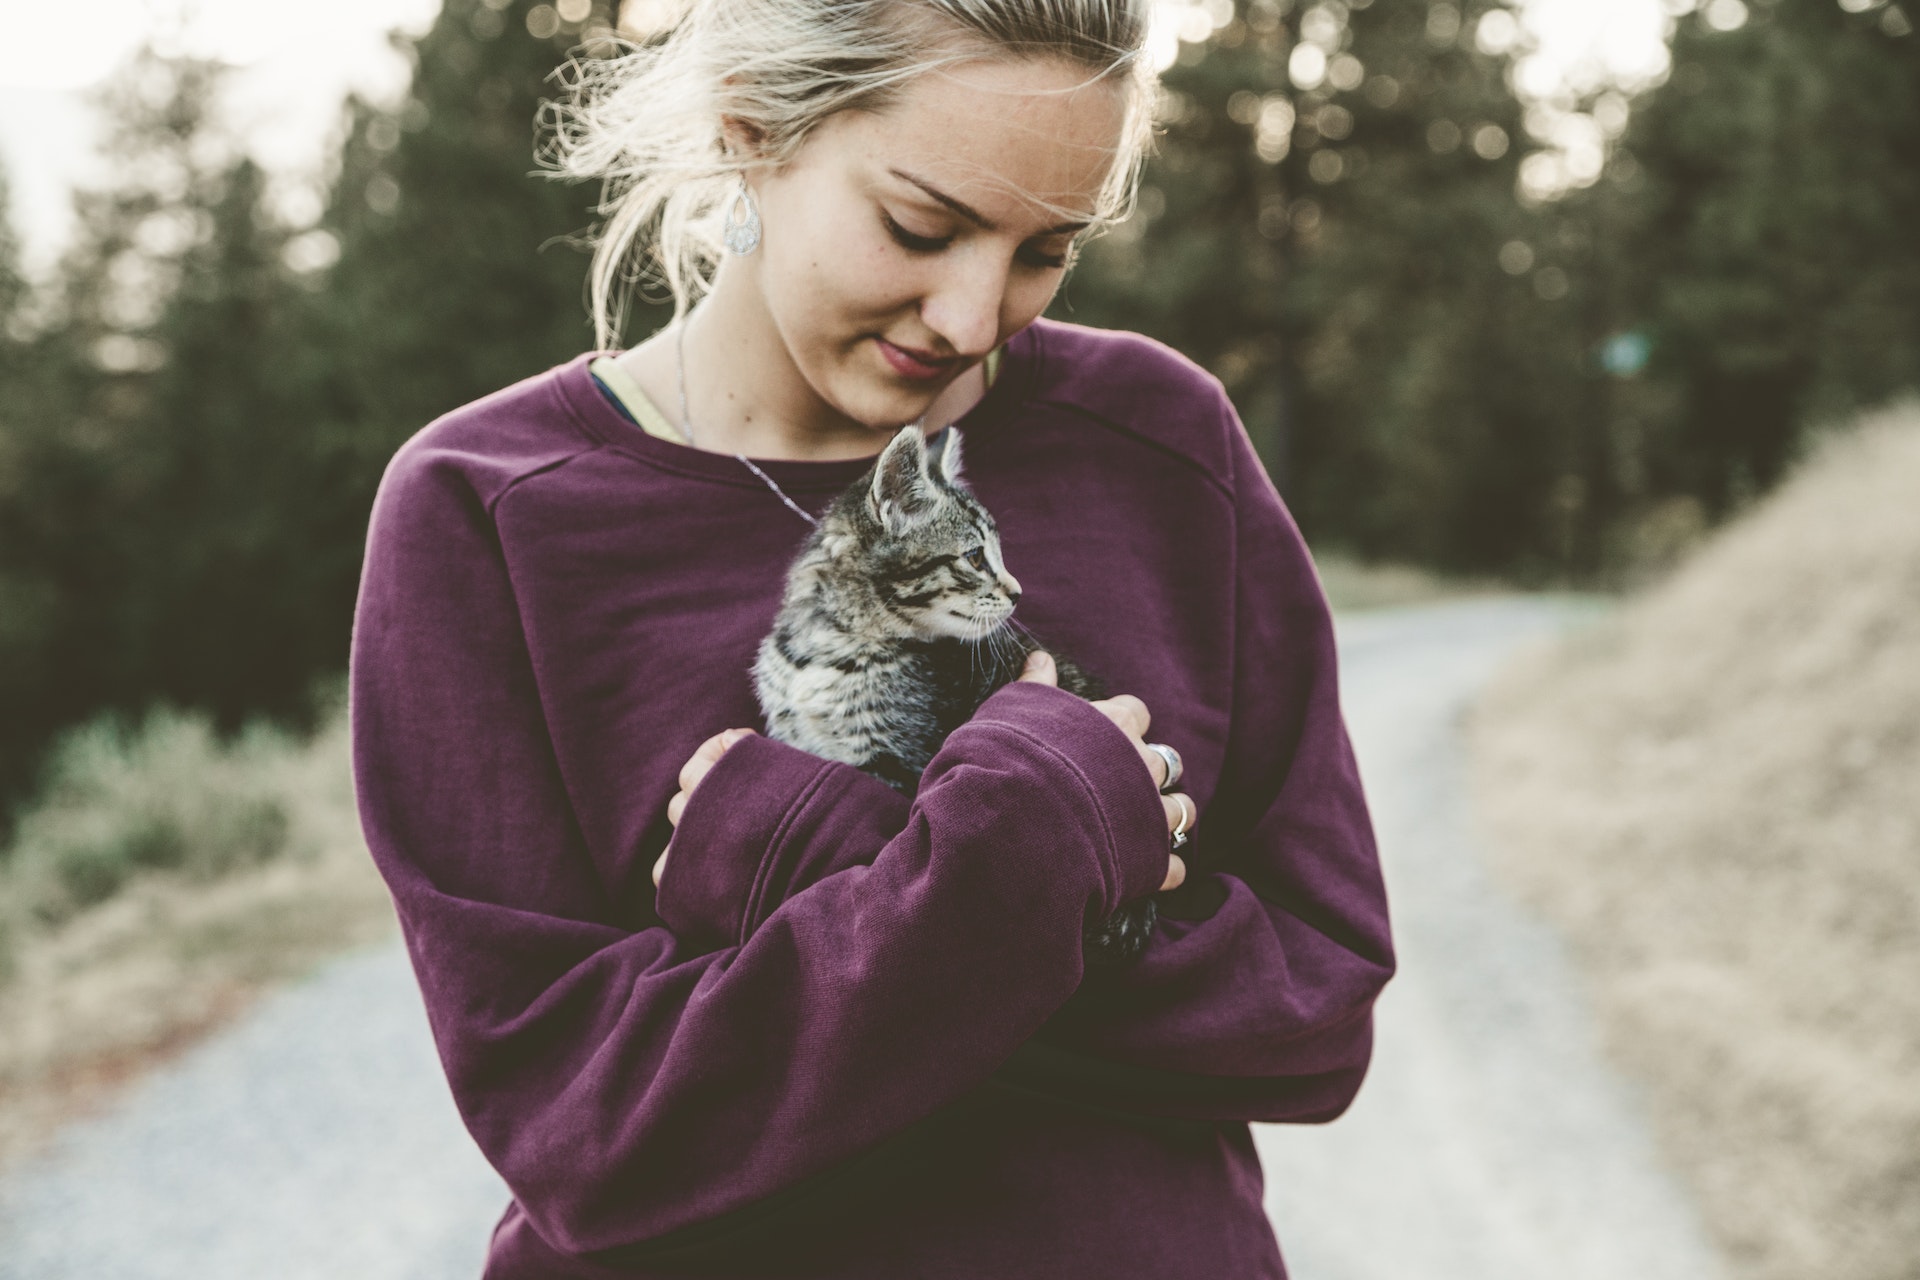 A young woman holding a cat | Source: Shutterstock